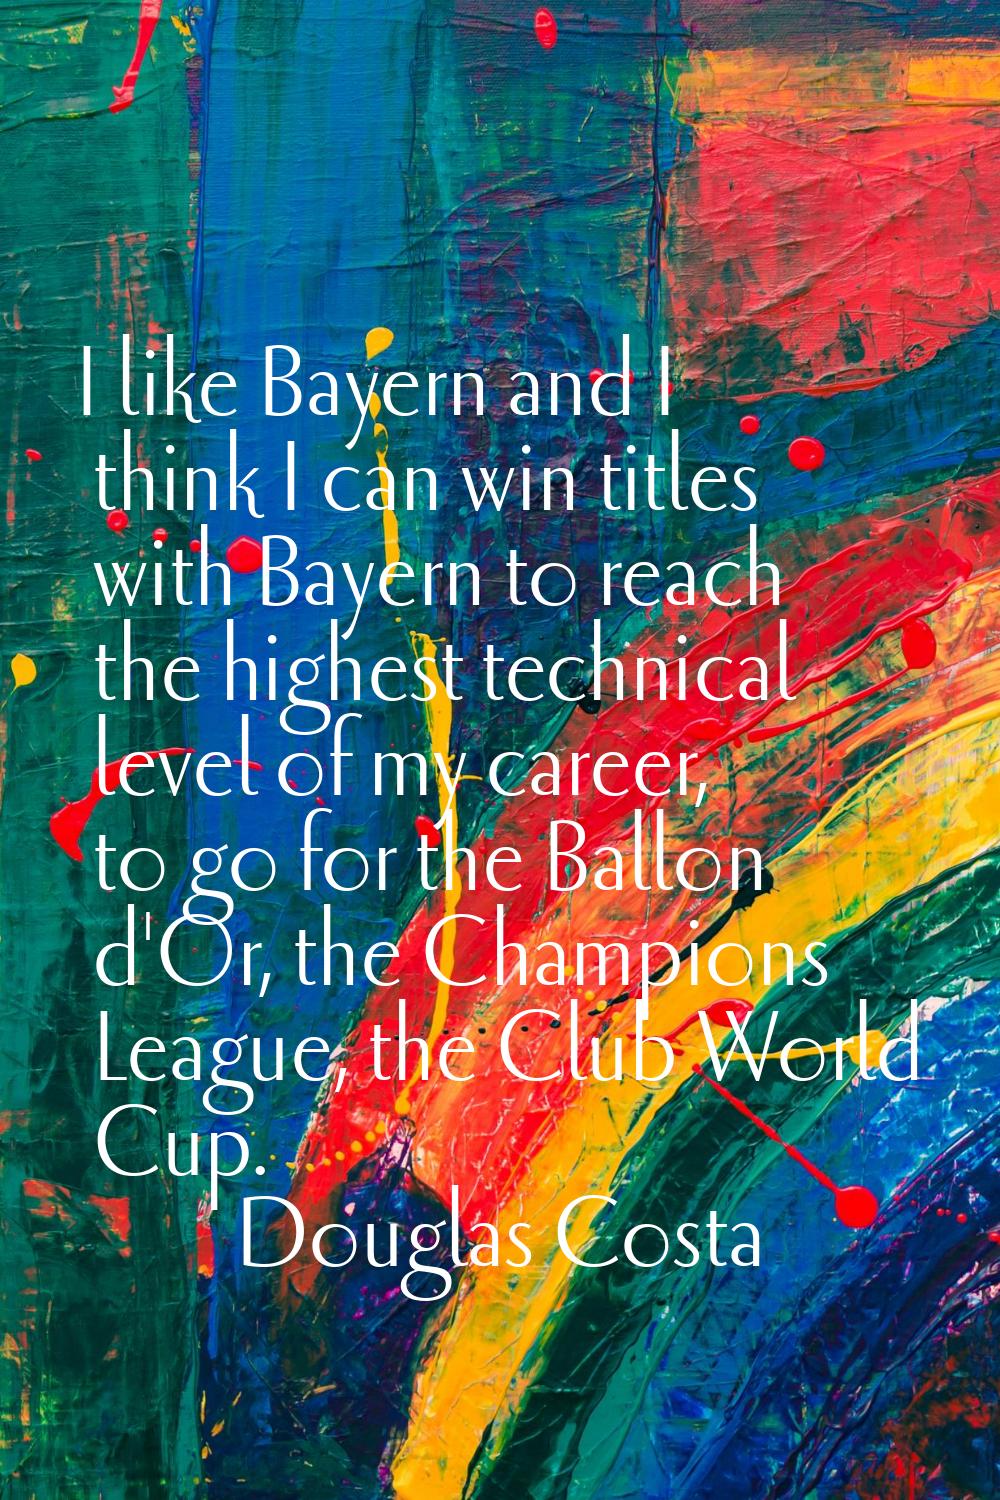 I like Bayern and I think I can win titles with Bayern to reach the highest technical level of my c